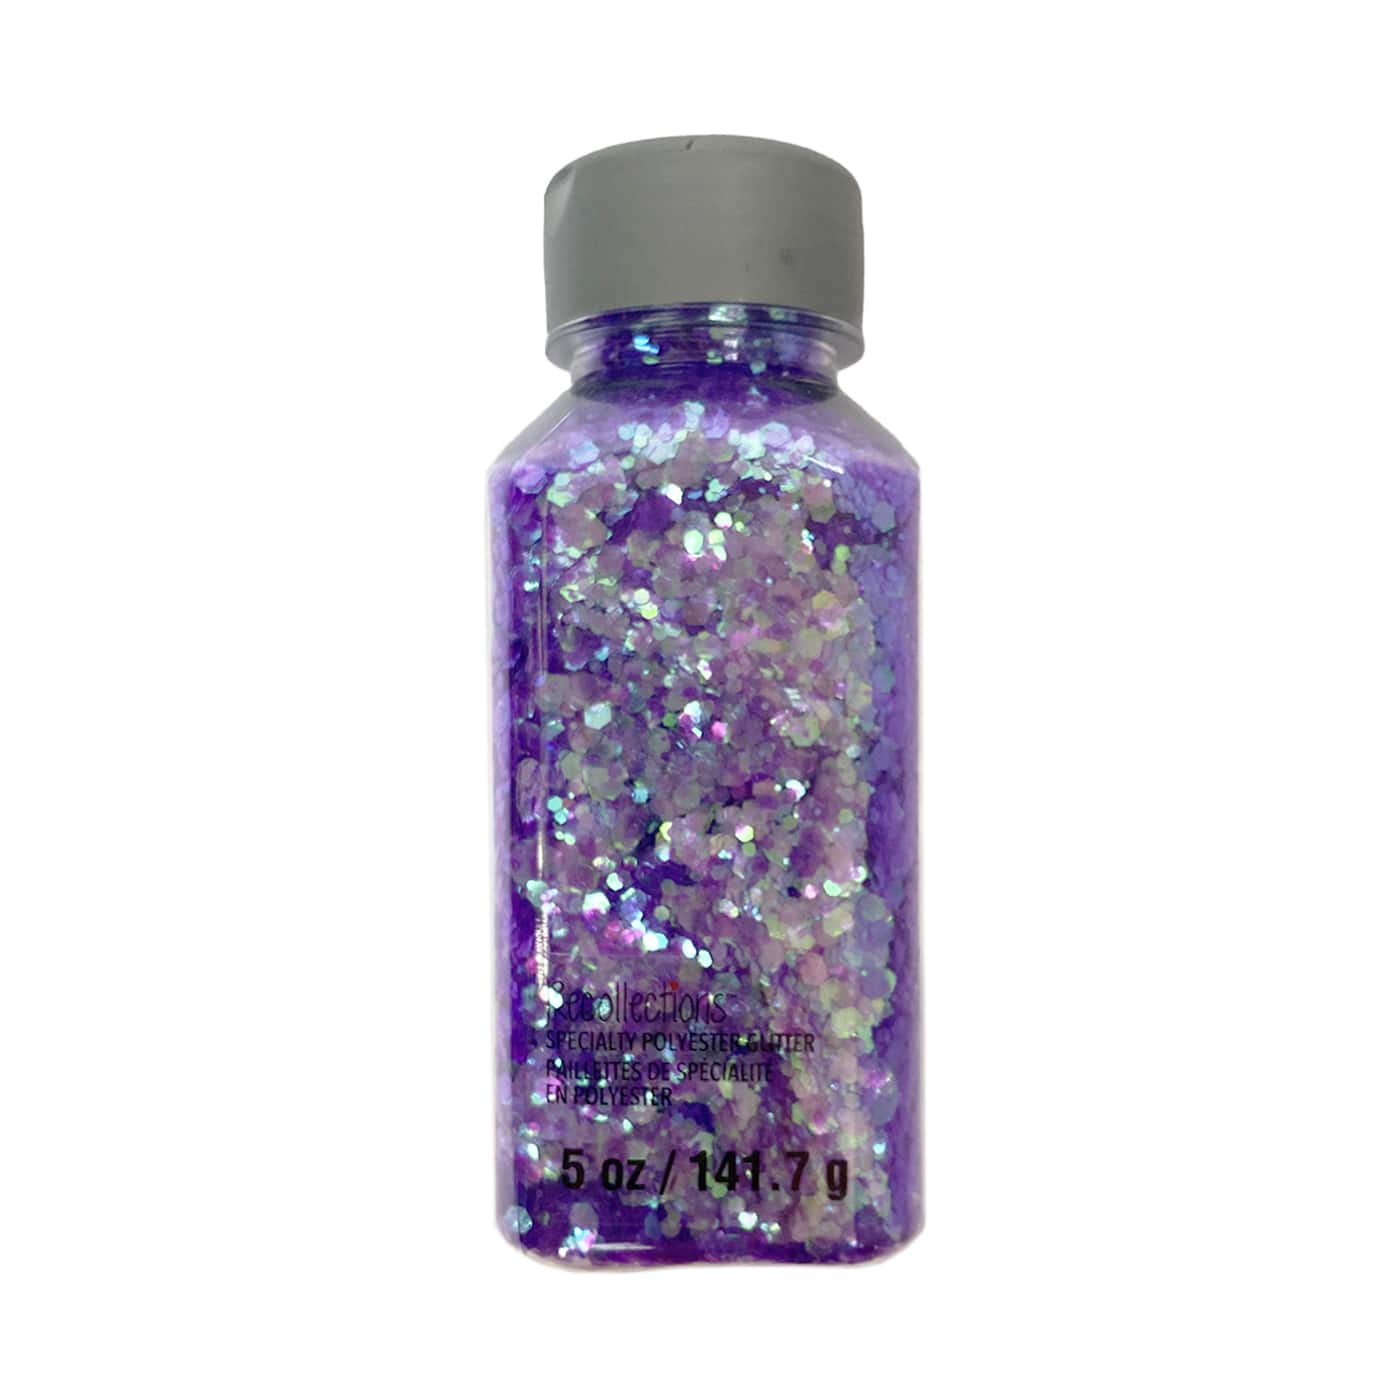 Iridescent Mix Specialty Glitter by Recollections™, 0.7oz.